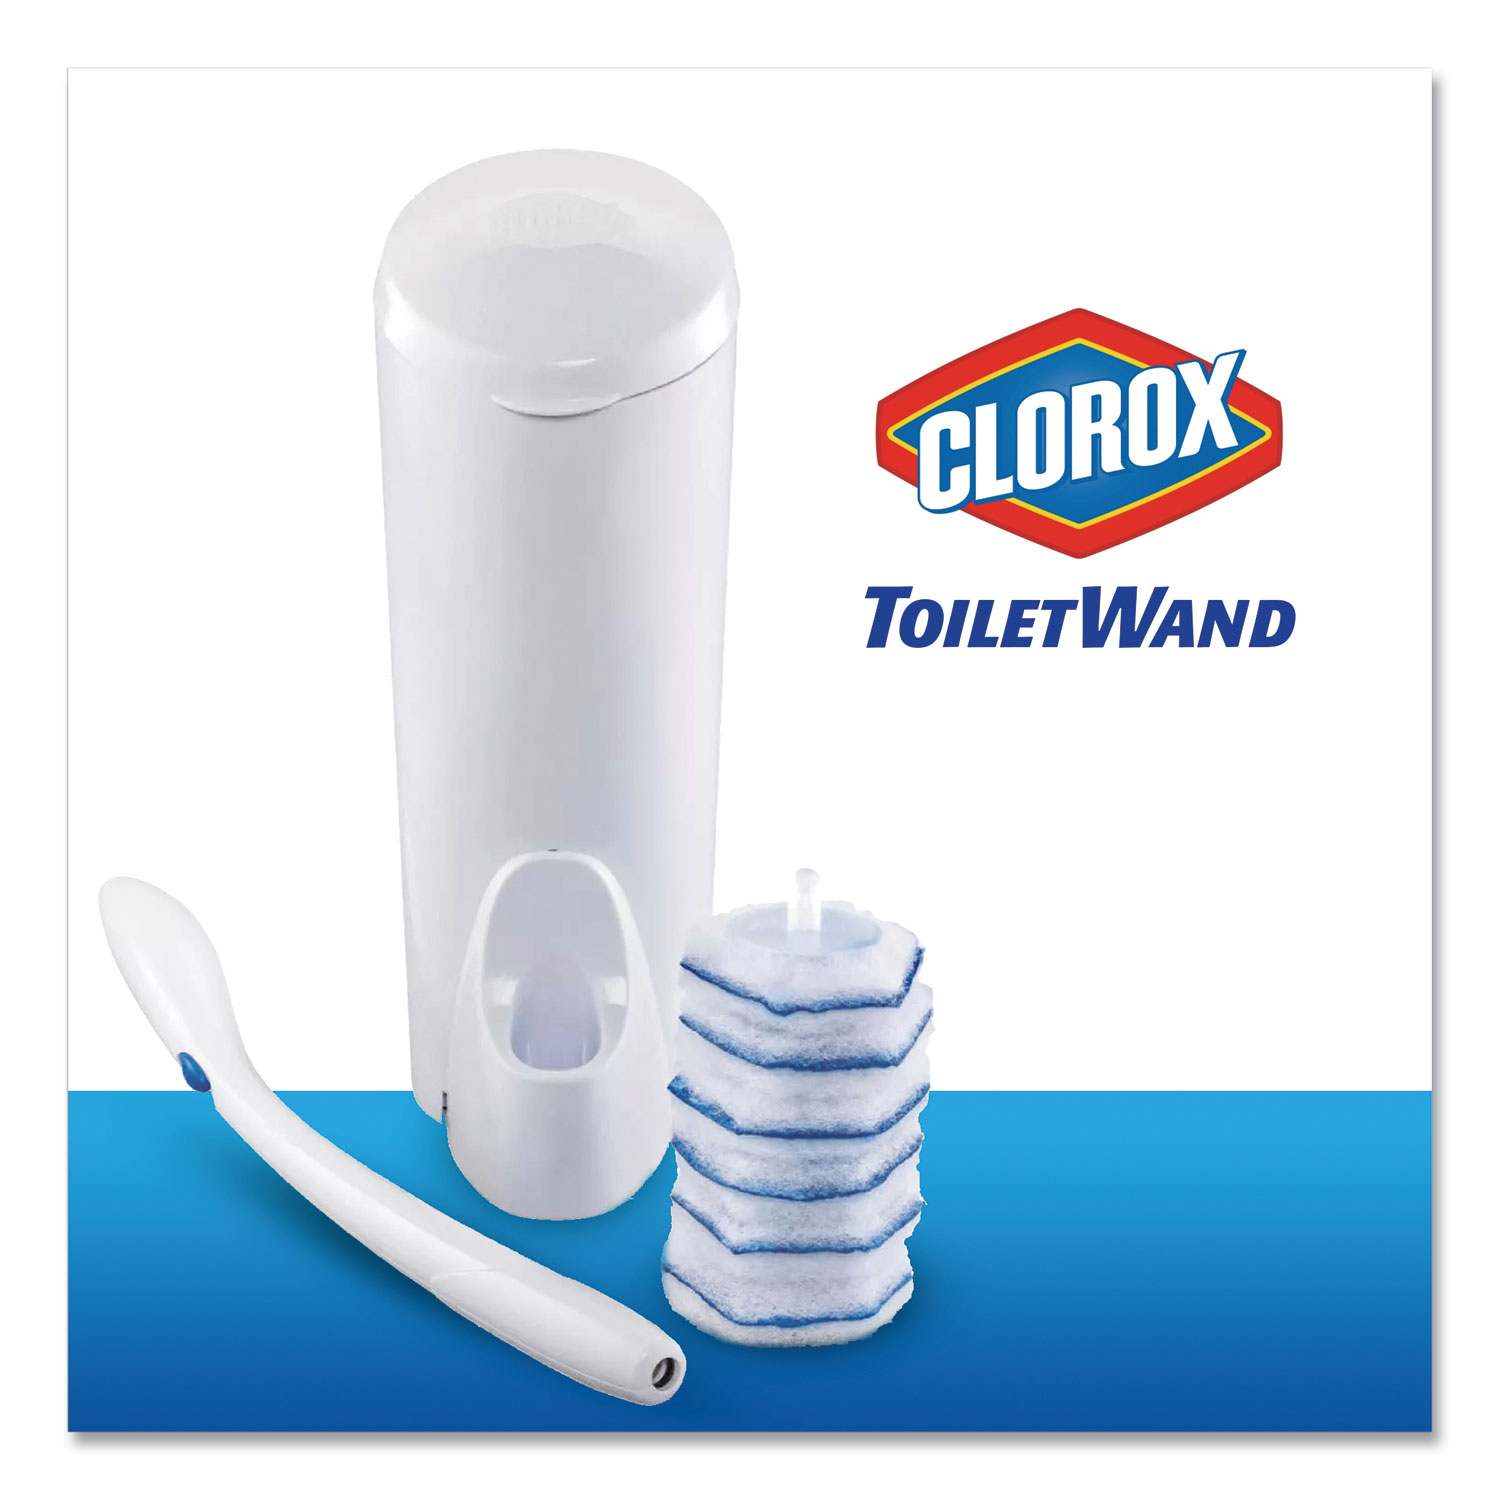  Clorox 03191 Toilet Wand Disposable Toilet Cleaning Kit: Handle, Caddy & Refills, White (CLO03191) 